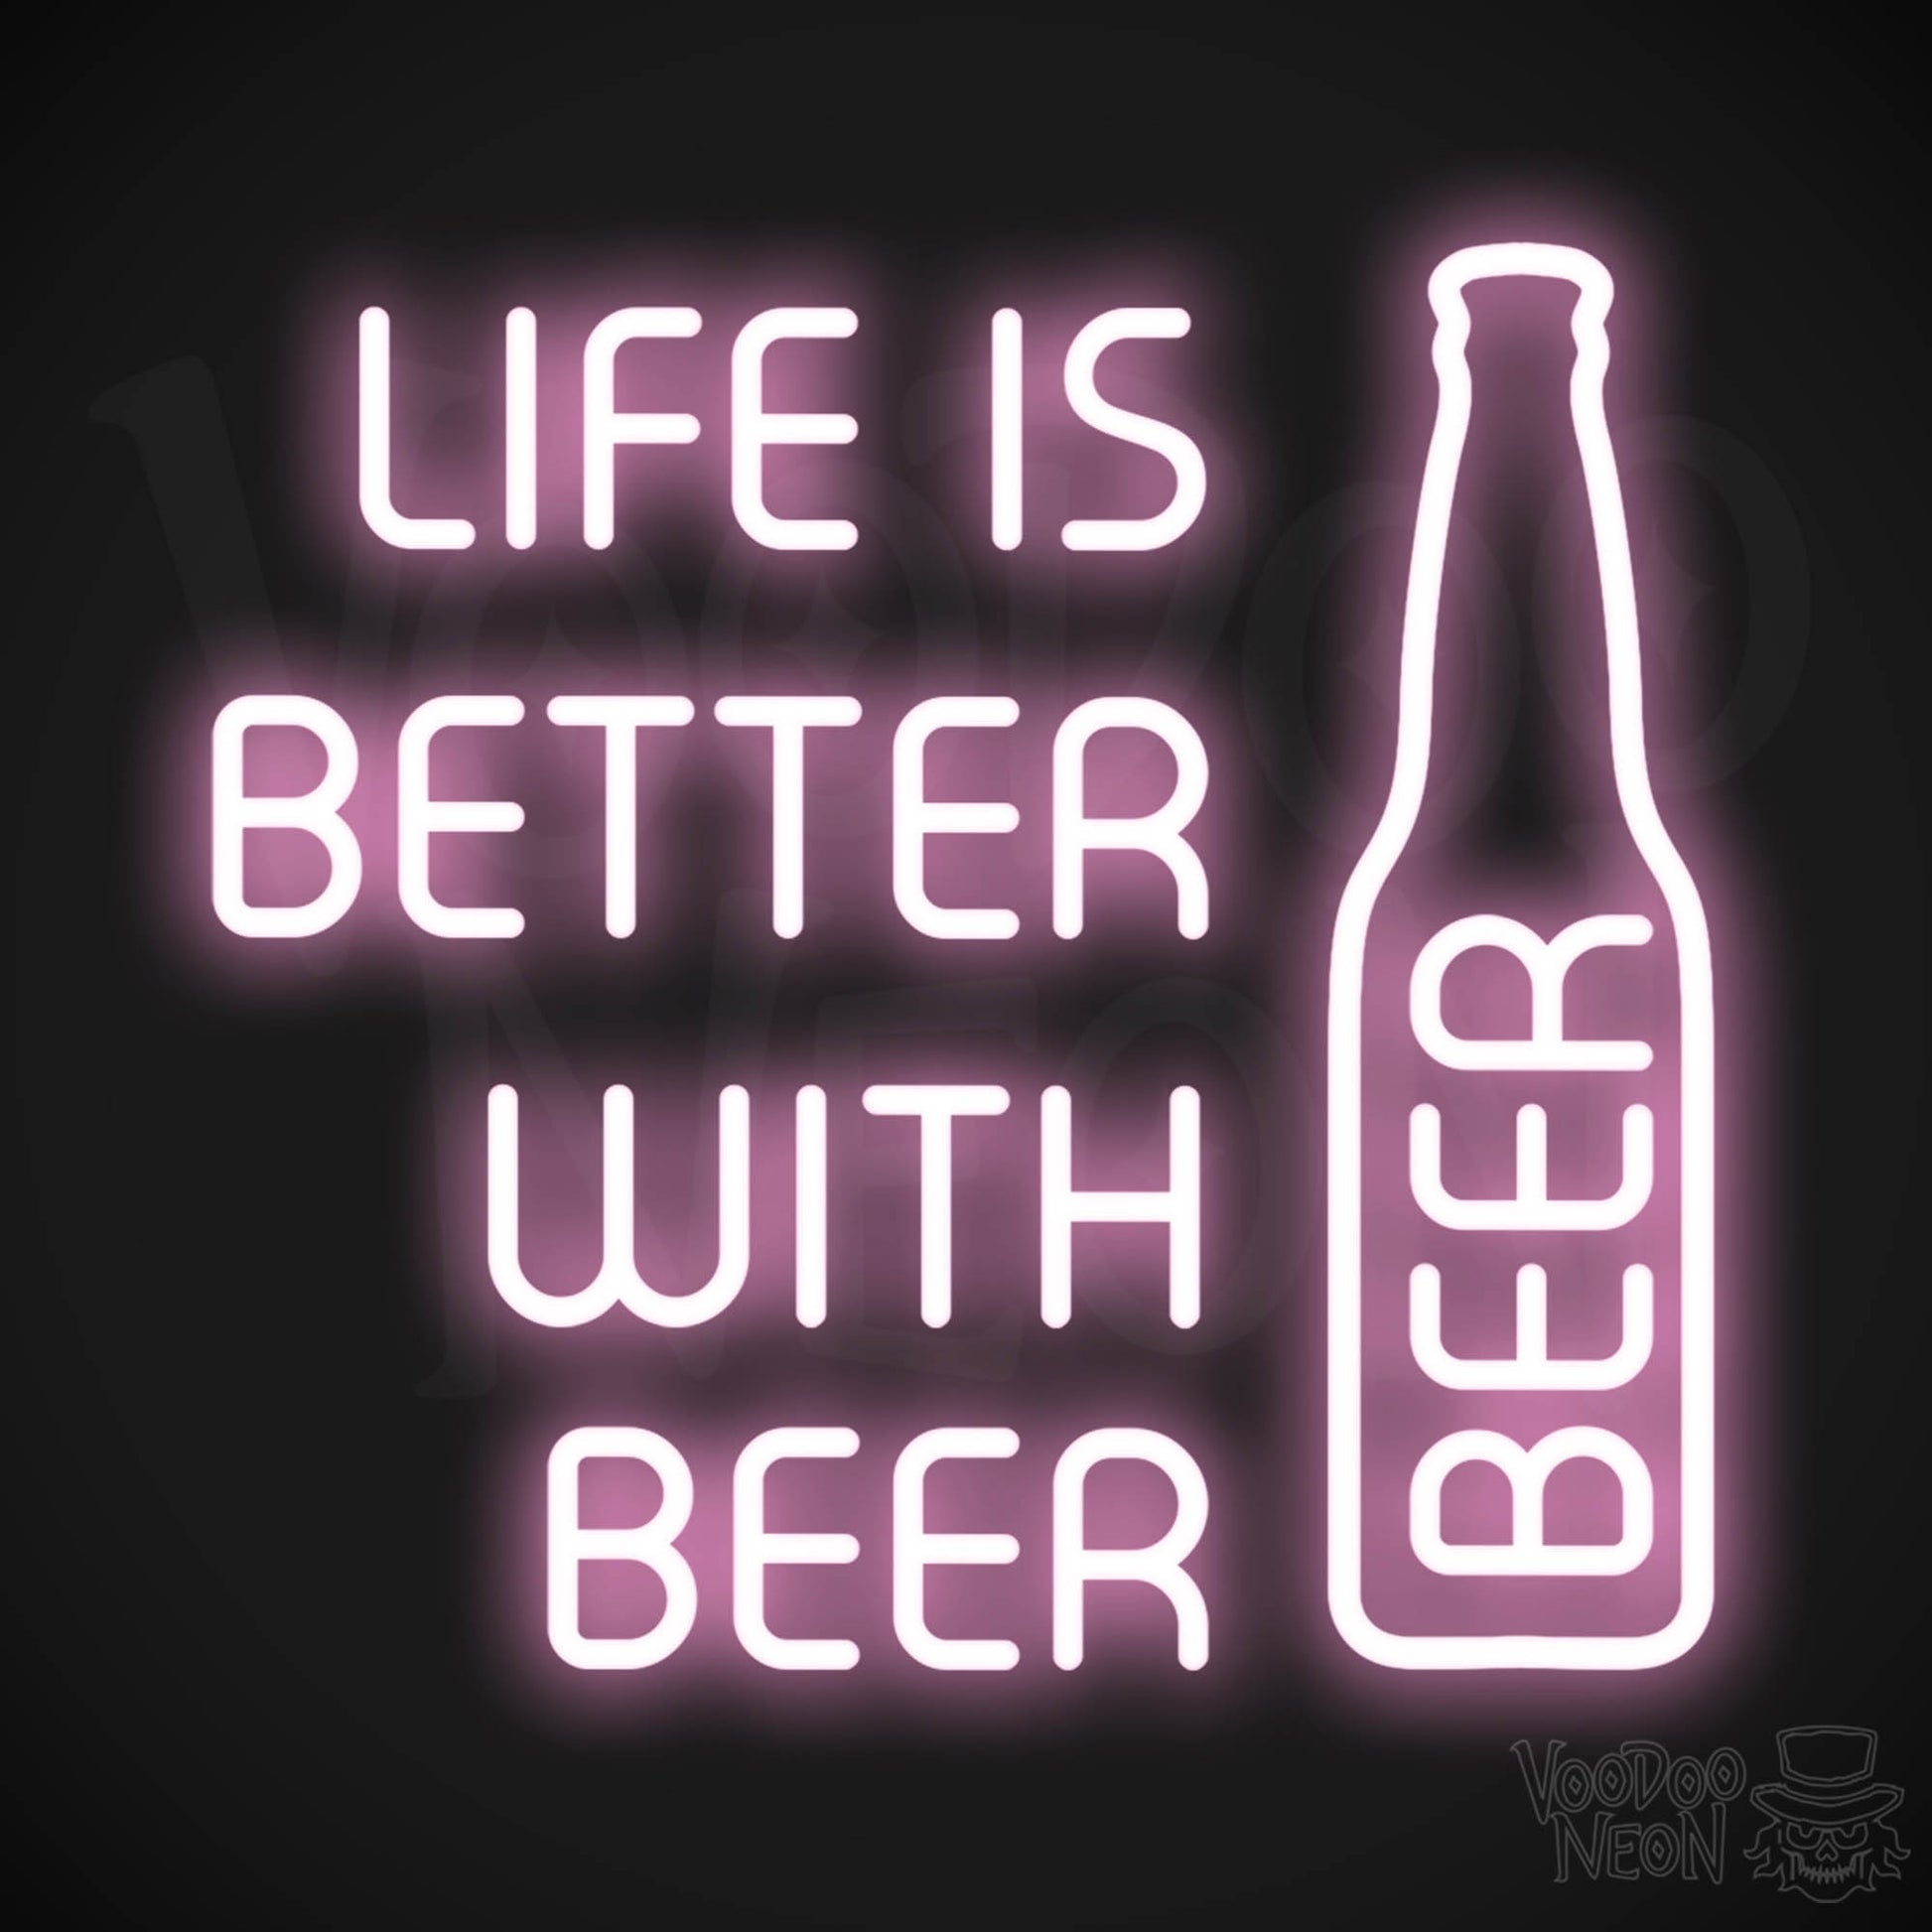 Life Is Better With Beer LED Neon - Light Pink